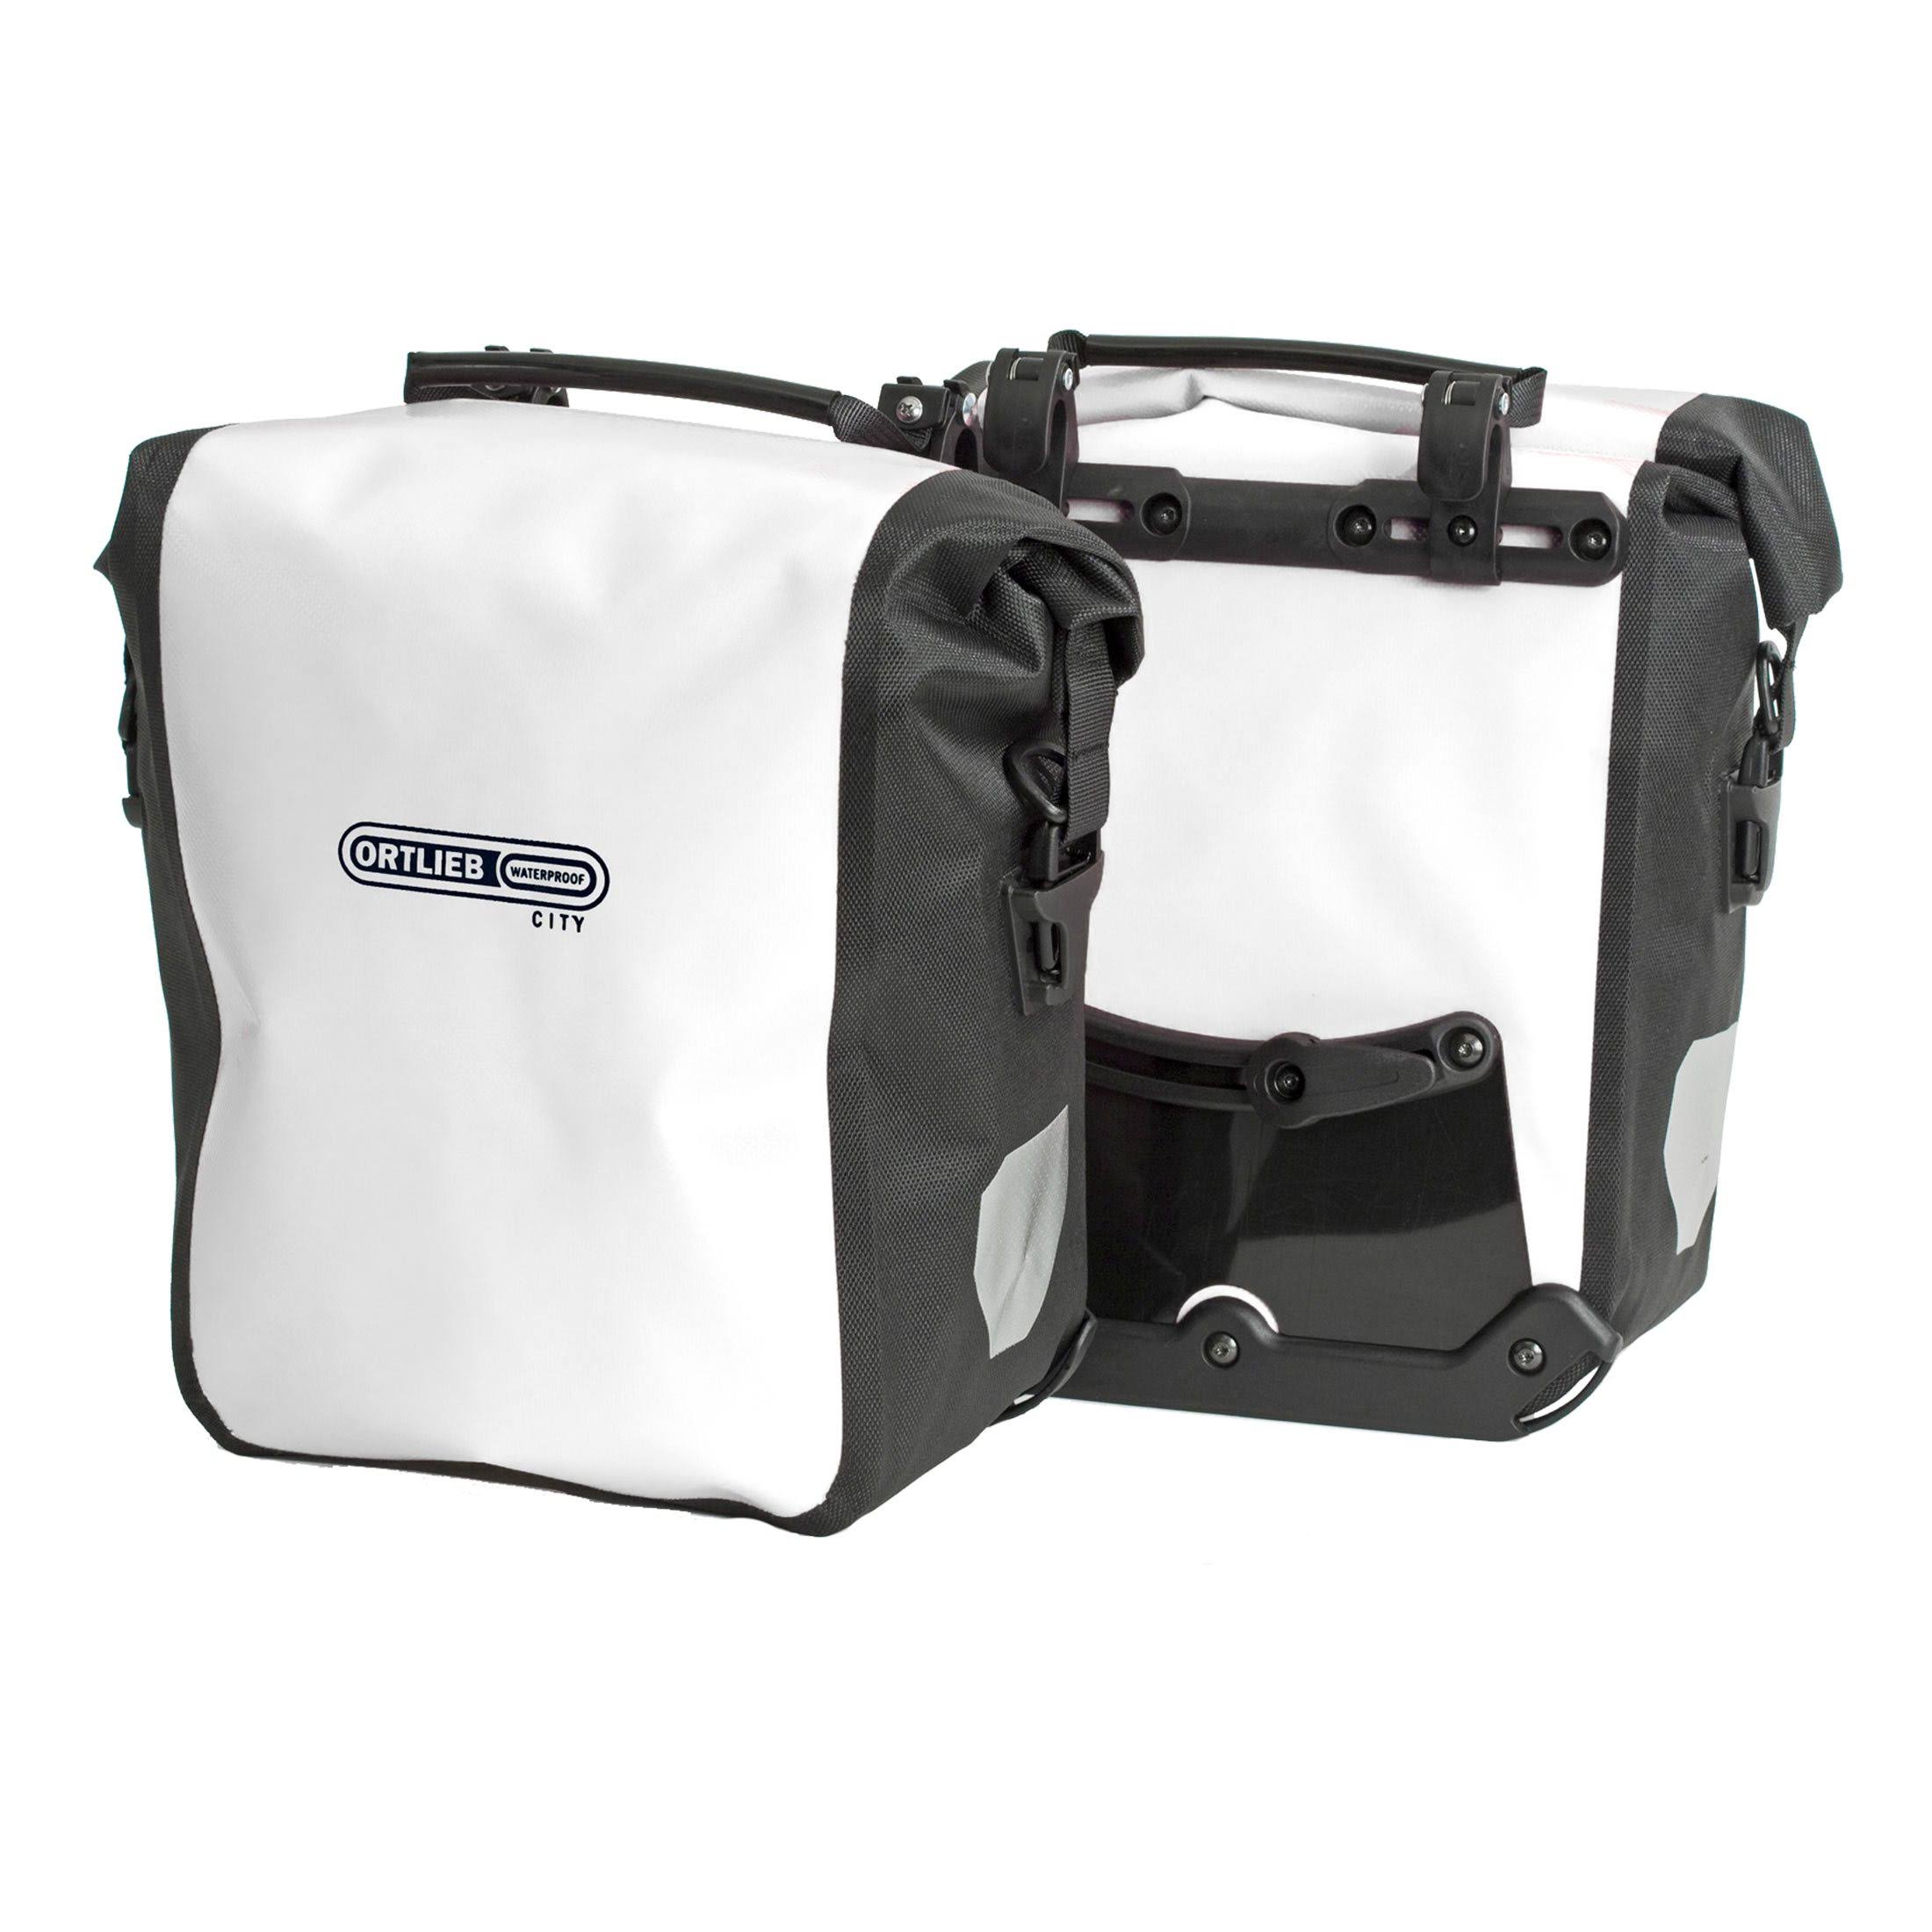 Ortlieb Front-Roller City Front Pannier - White & Black